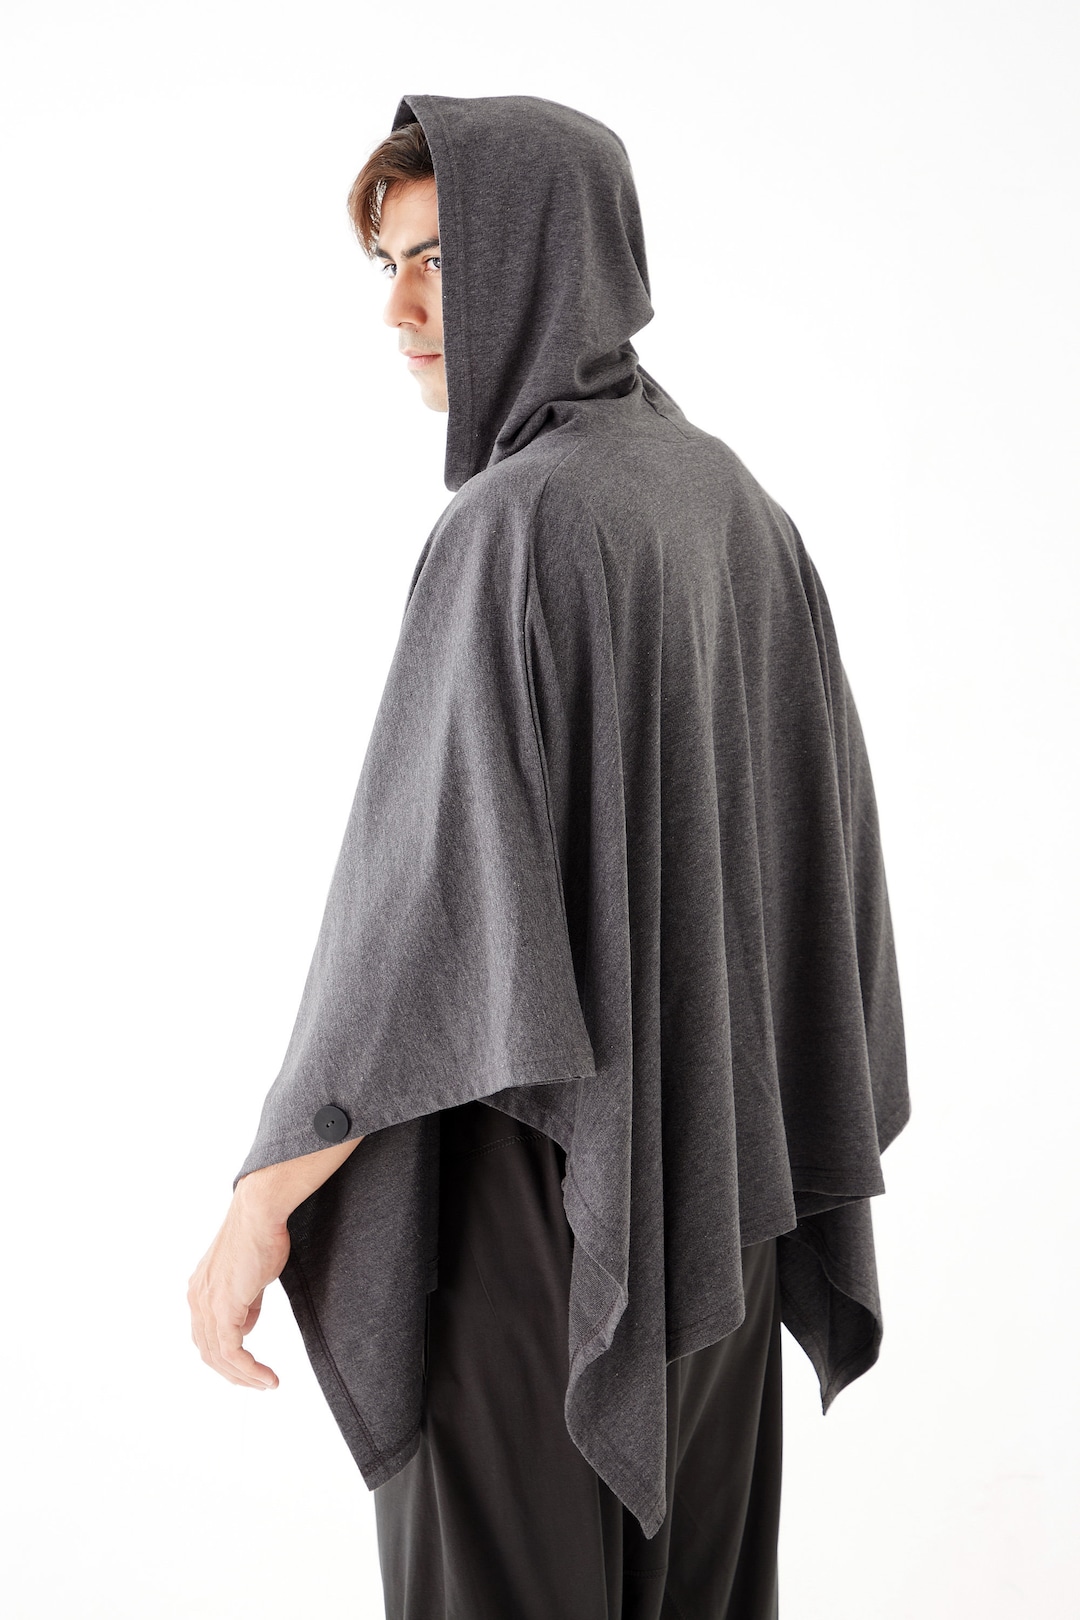 NO.163 Men's Button Front Hooded Poncho Comfy Versatile - Etsy